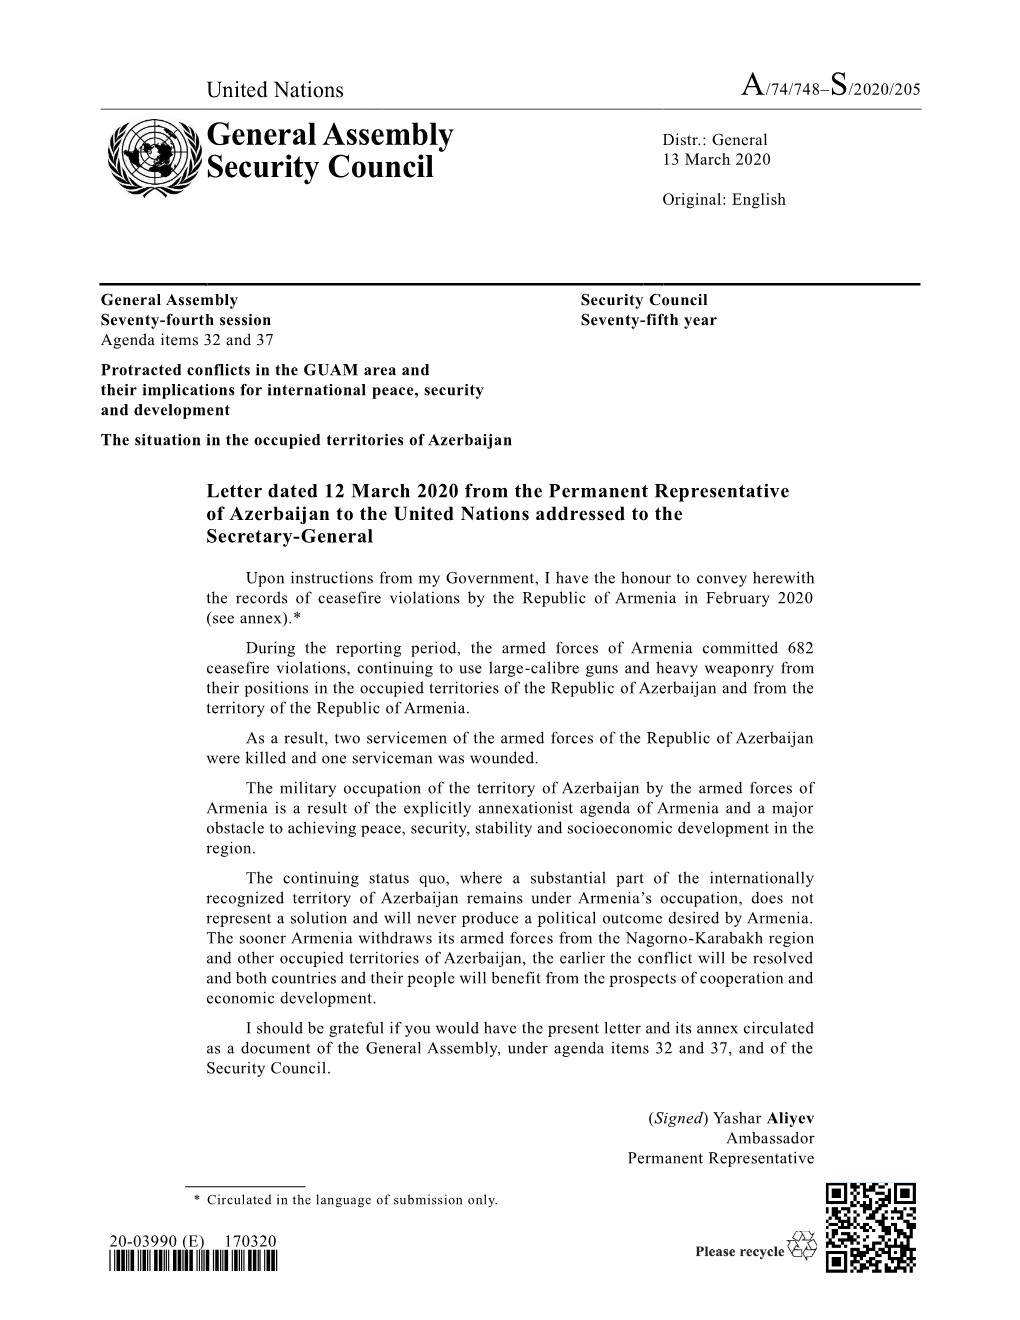 Letter Dated 12 March 2020 from the Permanent Representative of Azerbaijan to the United Nations Addressed to the Secretary-General